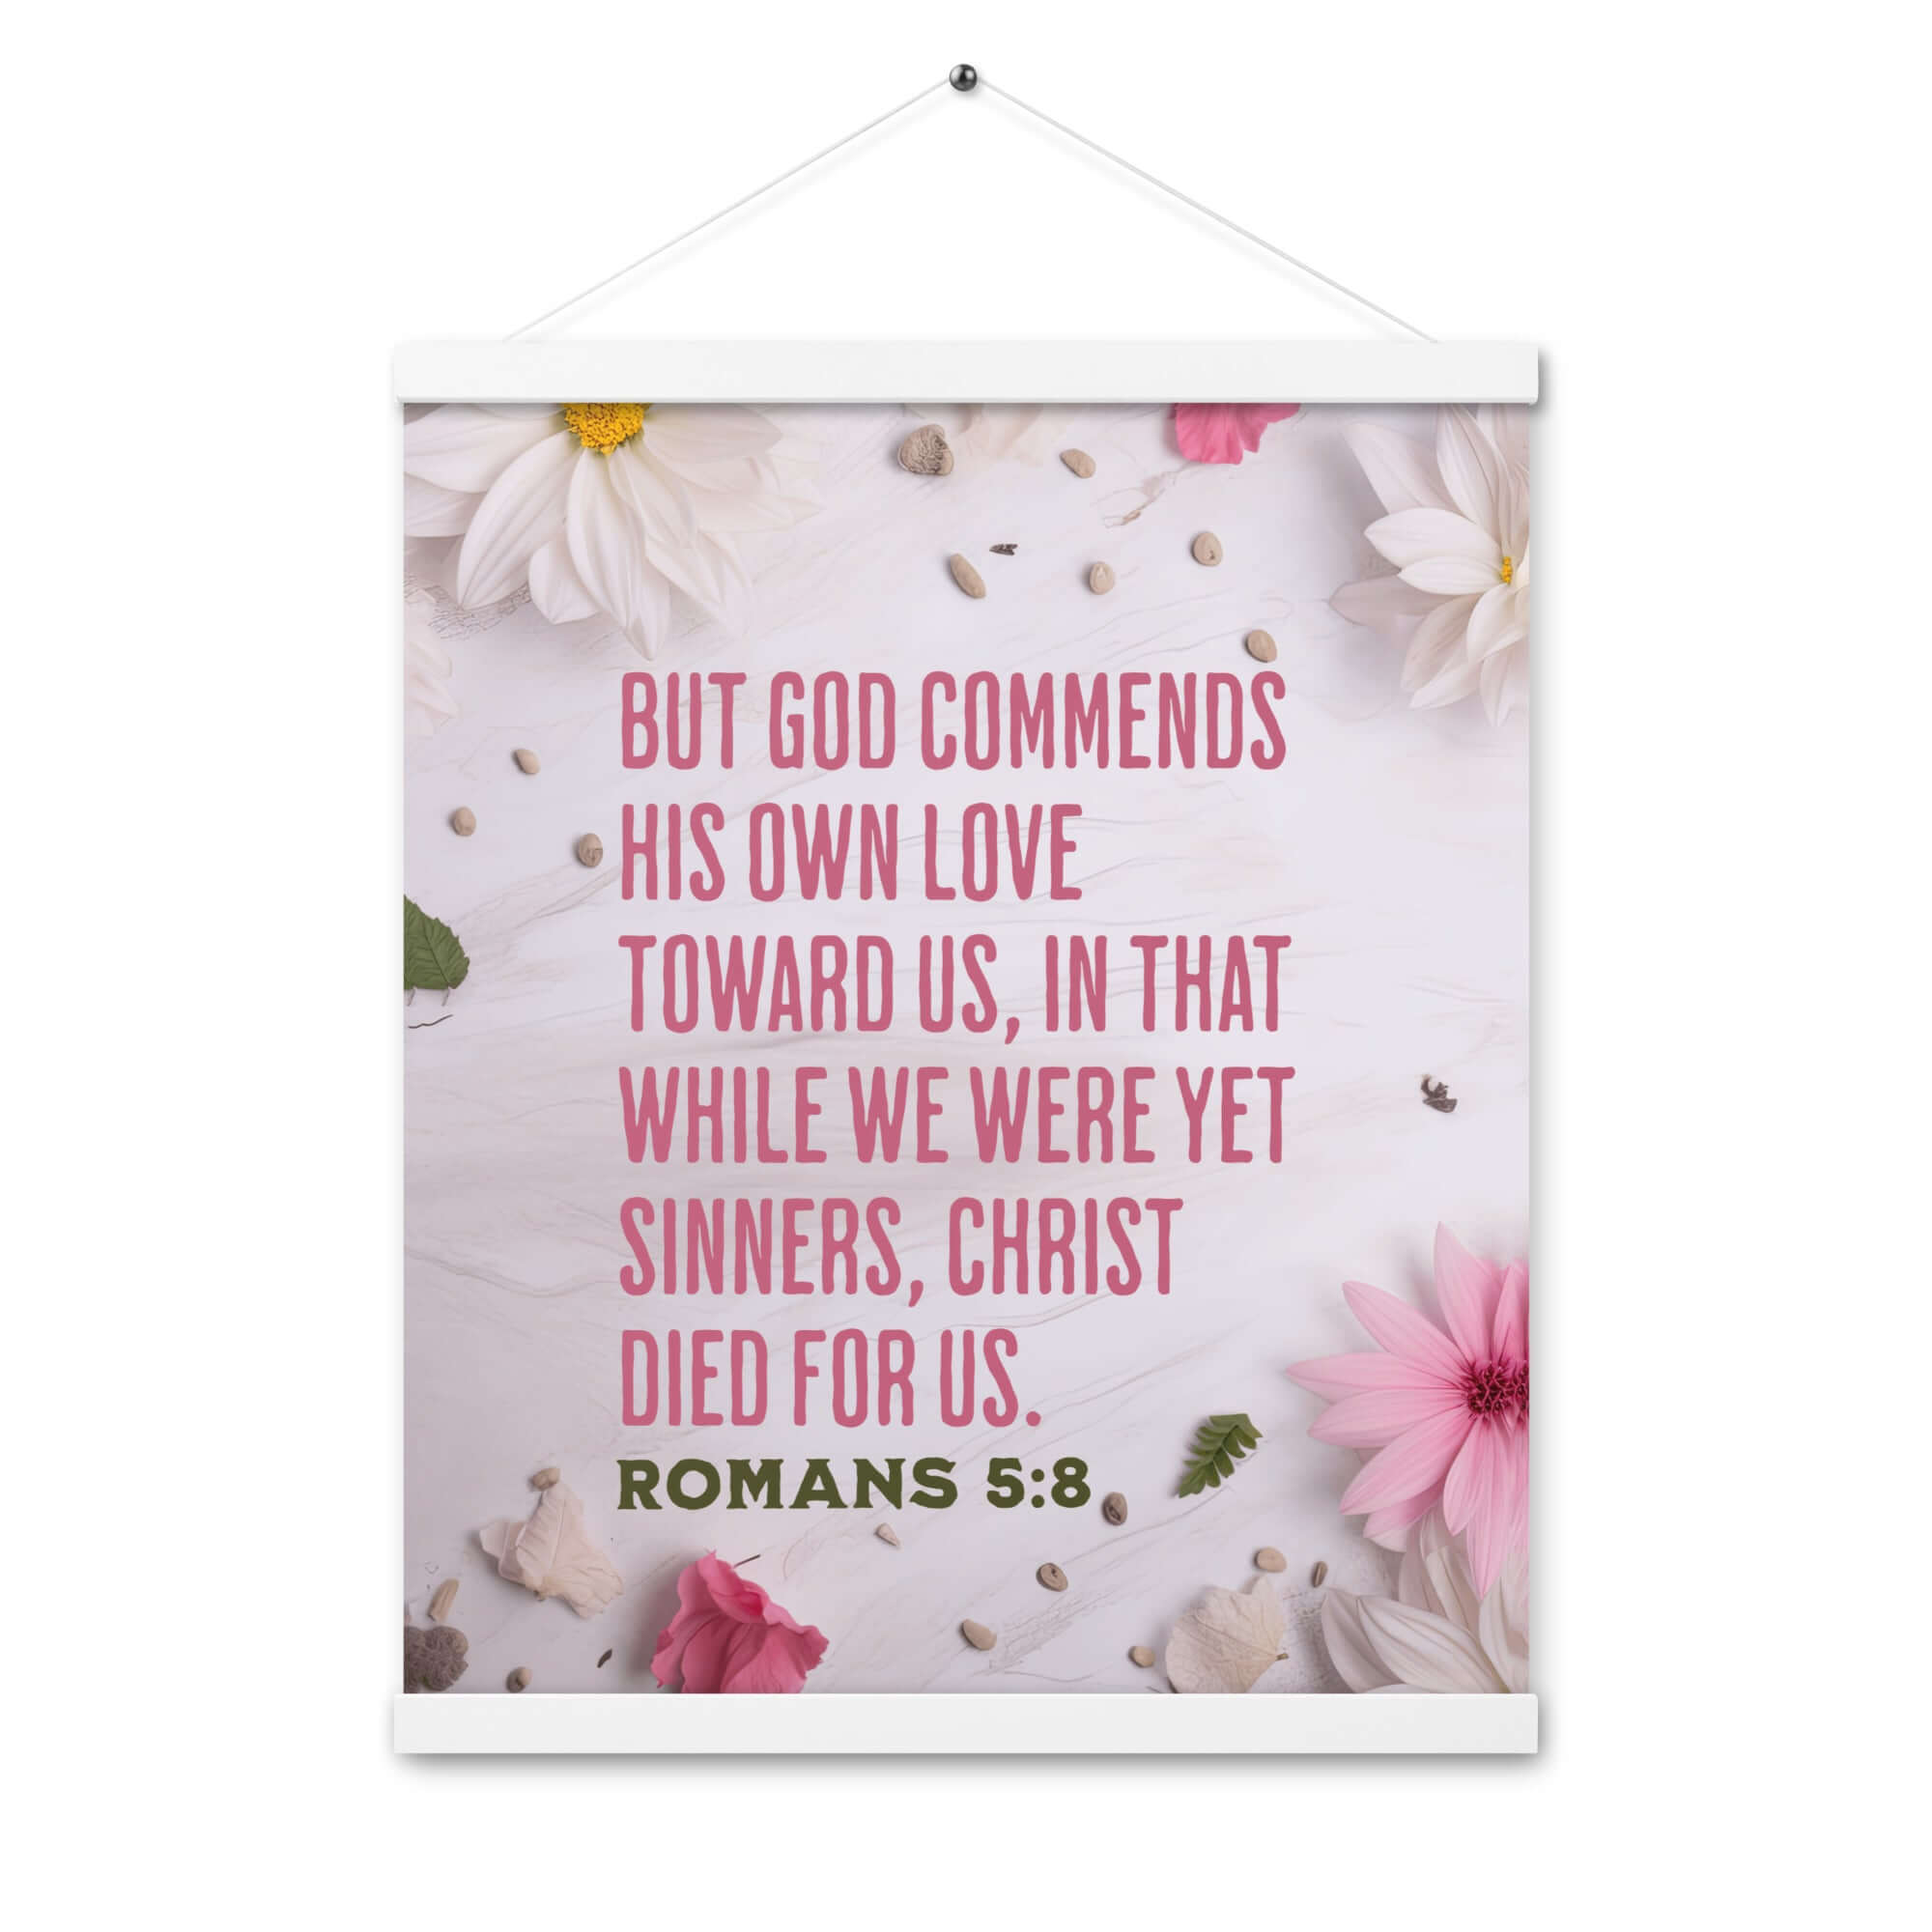 Romans 5:8 - Bible Verse, Christ Died for Us Hanger Poster